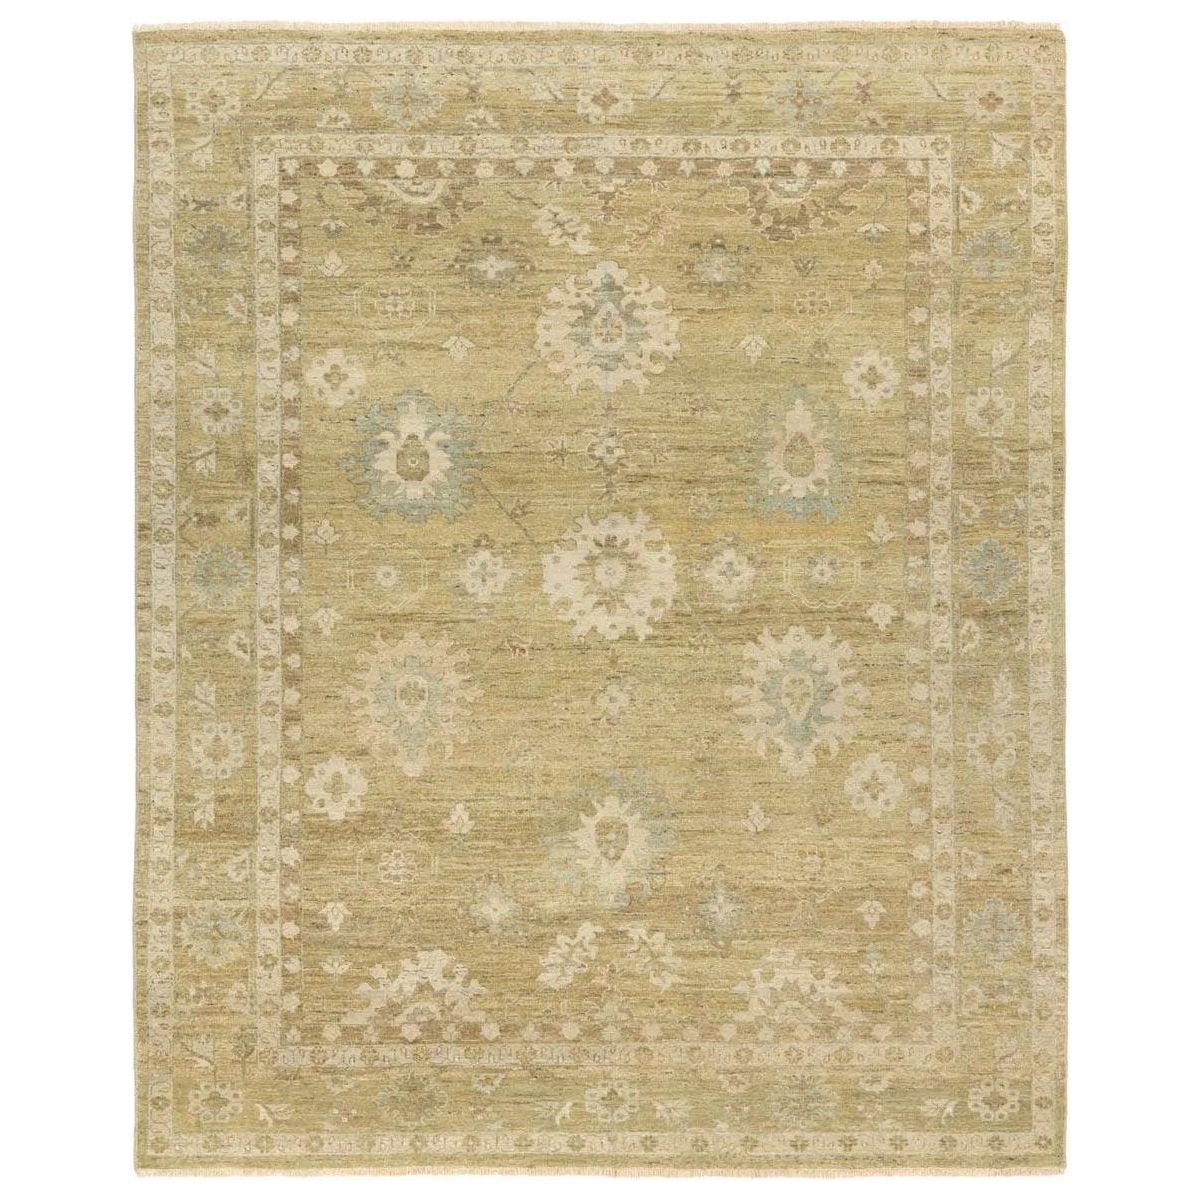 The Onessa Khalla marries traditional motifs with soft, subdued colorways for the perfect blend of fresh and time-honored style. These hand-knotted wool rugs feature a hand-sheared quality that lends the design a coveted vintage impression. The Challa rug features a floral, trellis pattern in cream and green with accents of taupe and brown. Amethyst Home provides interior design, new home construction design consulting, vintage area rugs, and lighting in the Salt Lake City metro area.